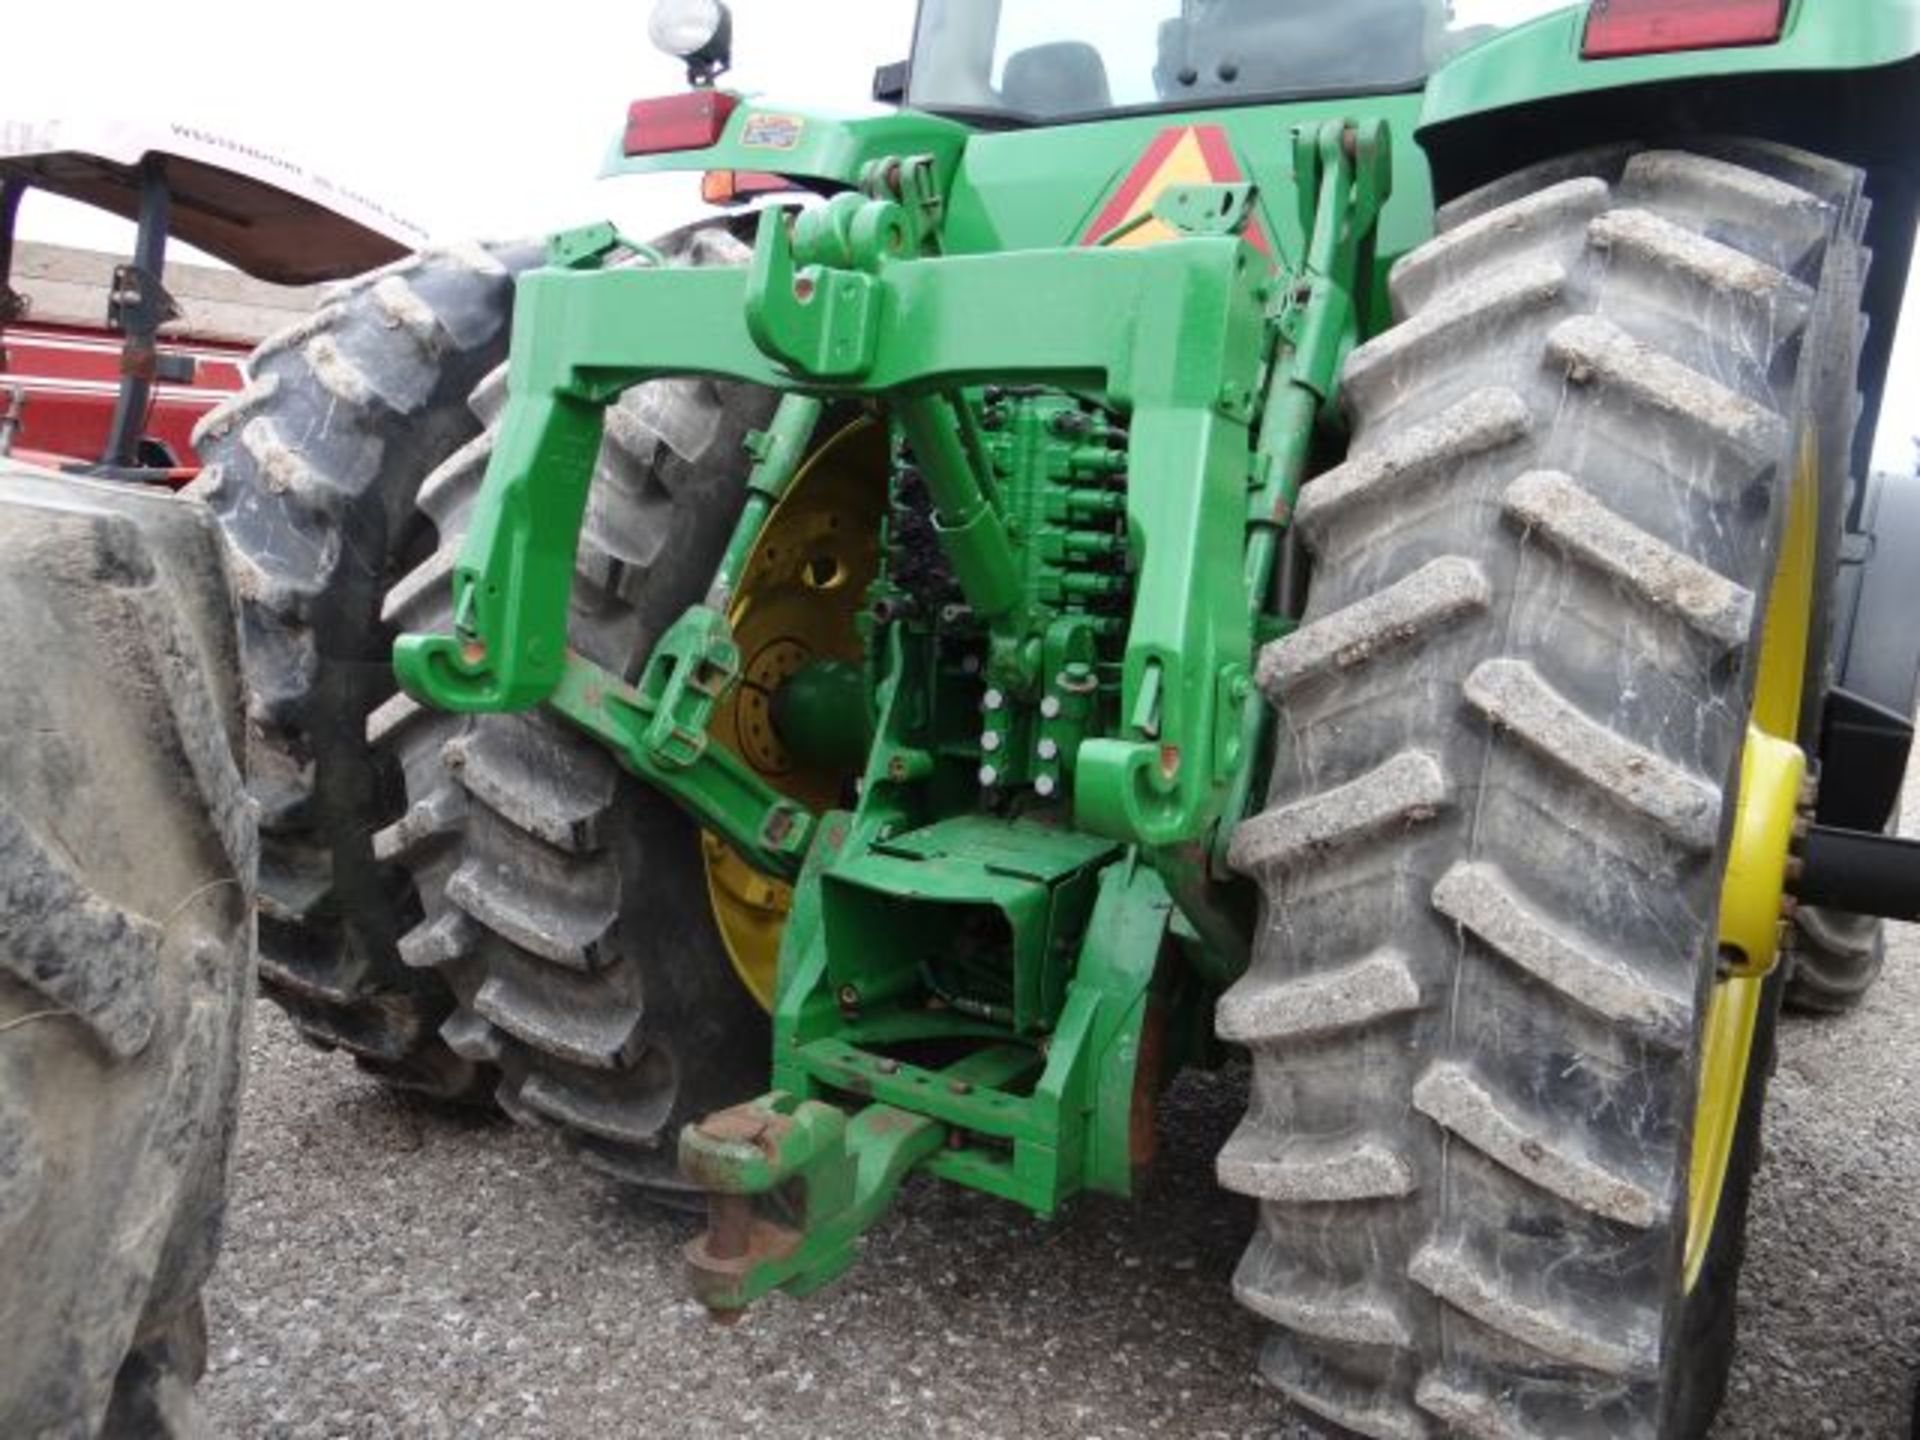 JD8520 Tractor, 2005 Powershift, ILS, 50" Tires, Wt Kit, 4410 hrs - Image 3 of 6